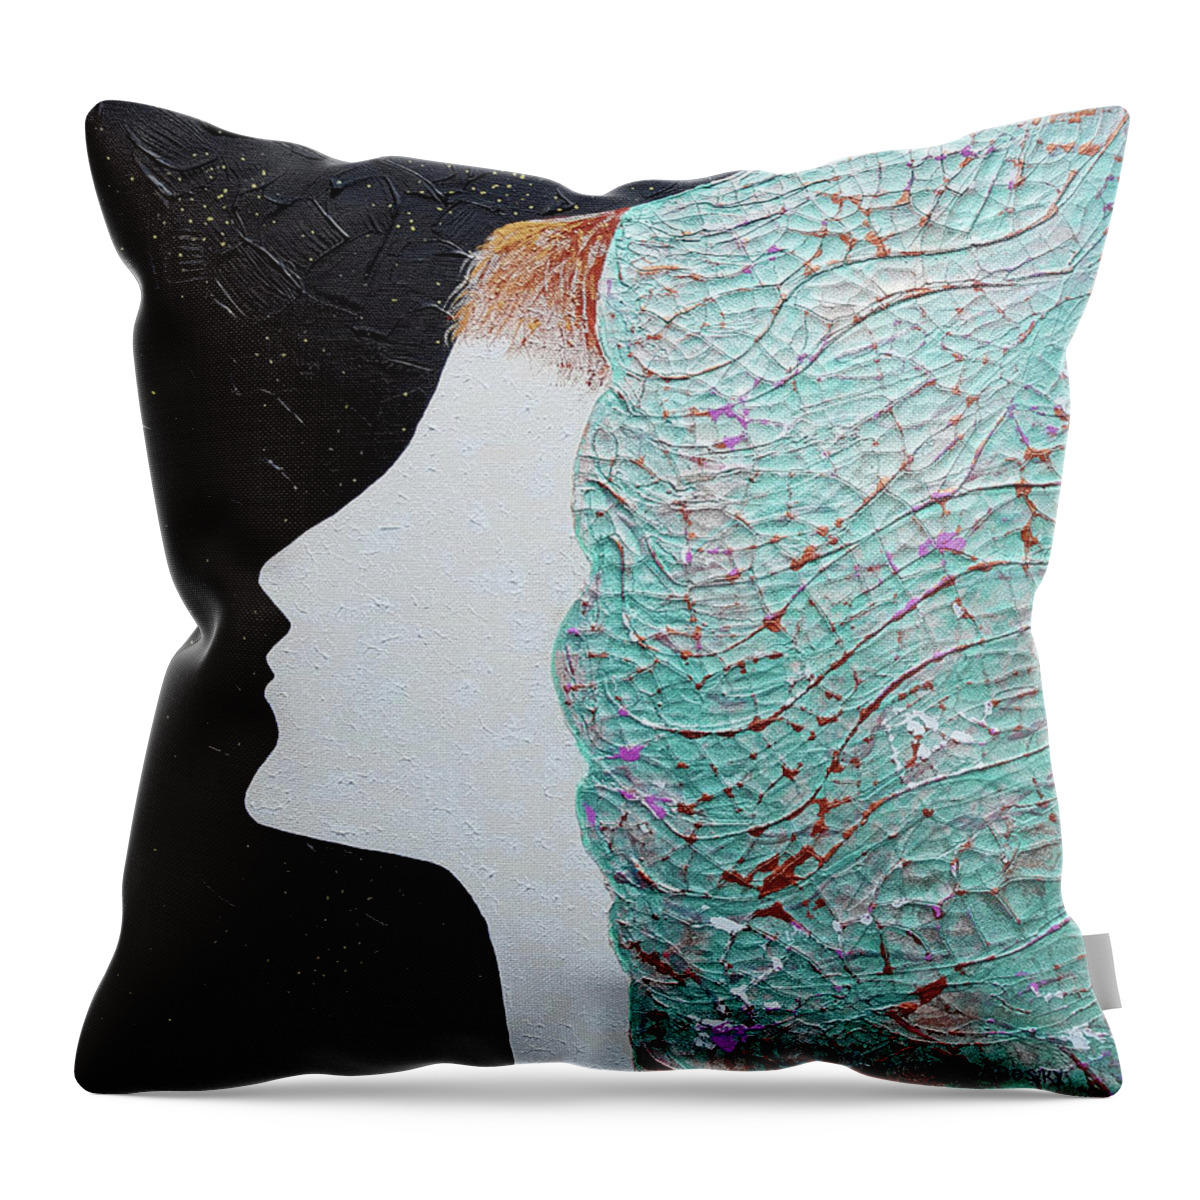 Acrylic Throw Pillow featuring the painting Star Gazing by Diana Hrabosky